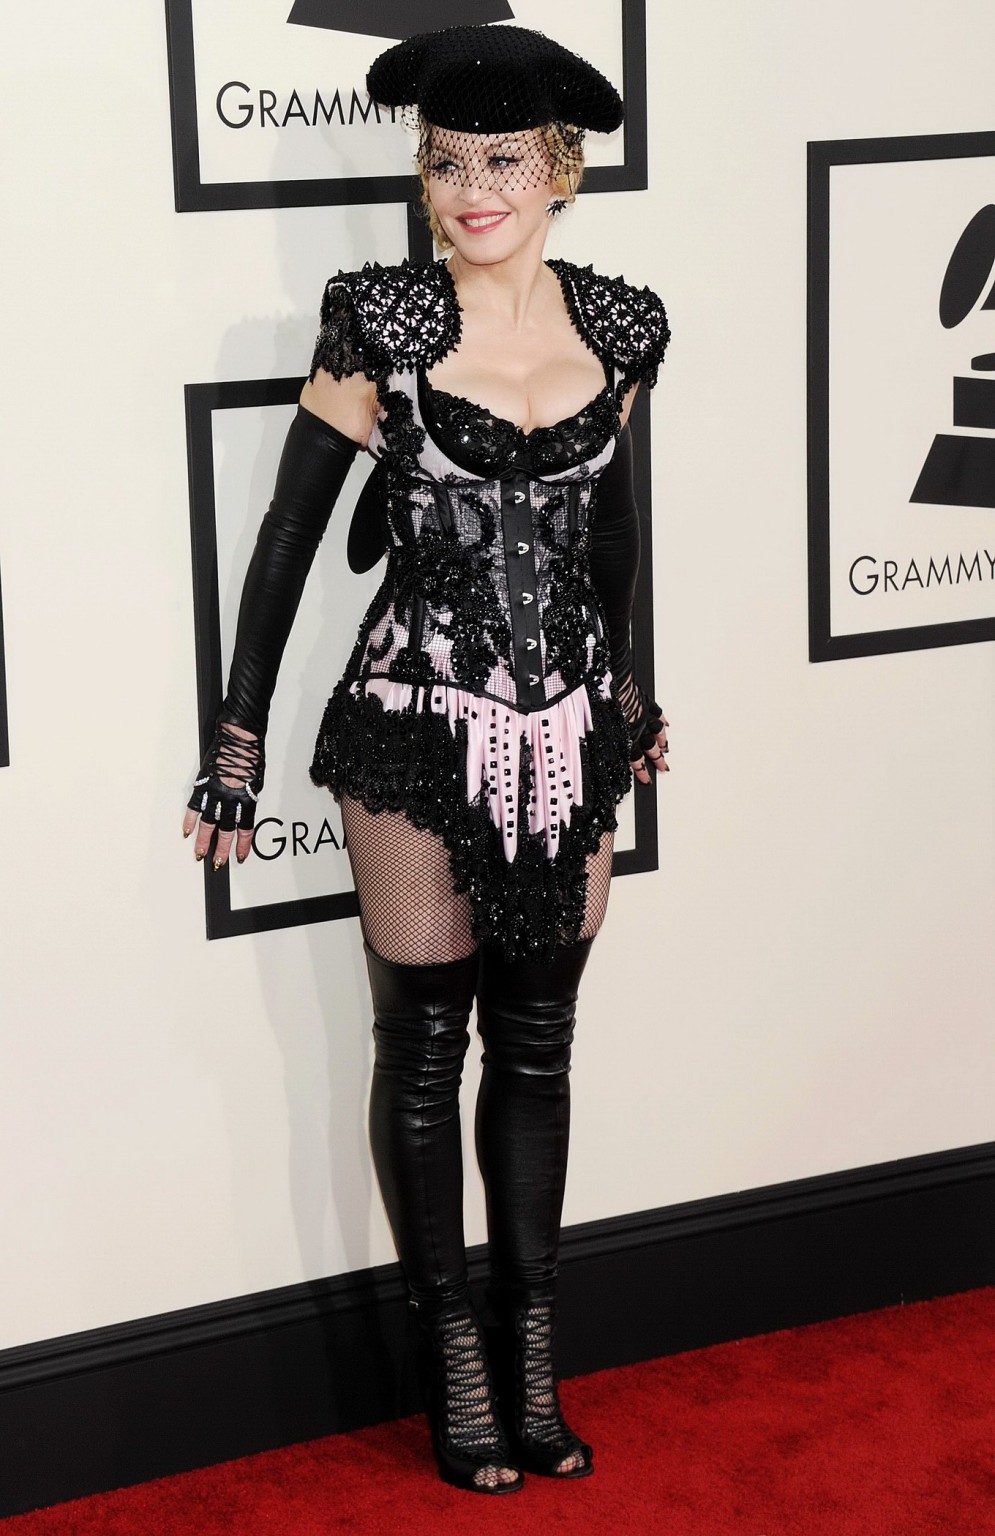 Madonna cleavy wearing a slutty outfit at the 57th Annual GRAMMY Awards in LA #75173045